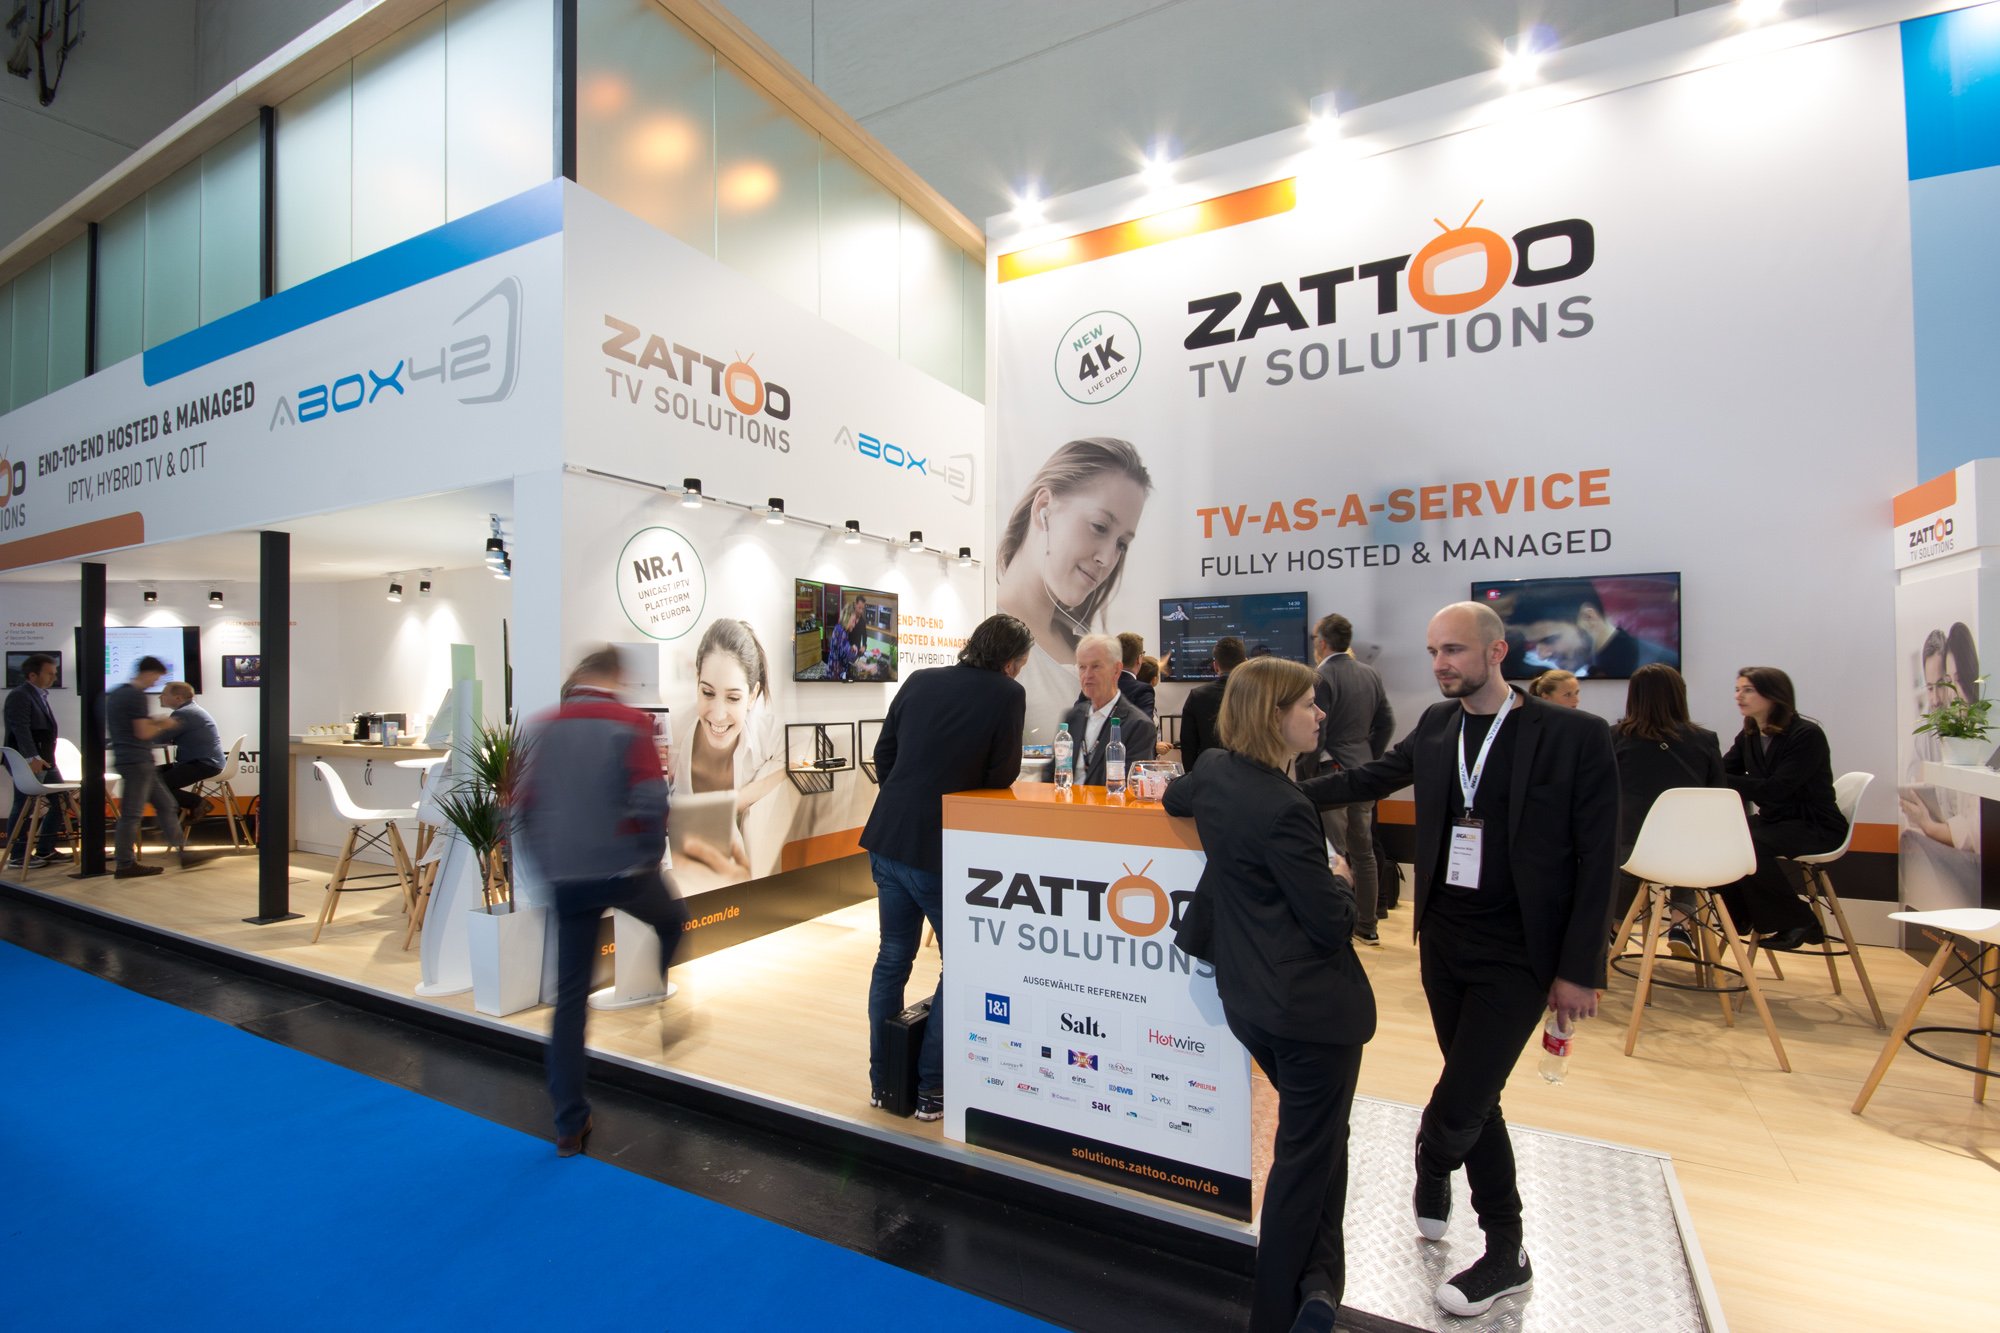 exhibition stand for ZATTOO and ABOX